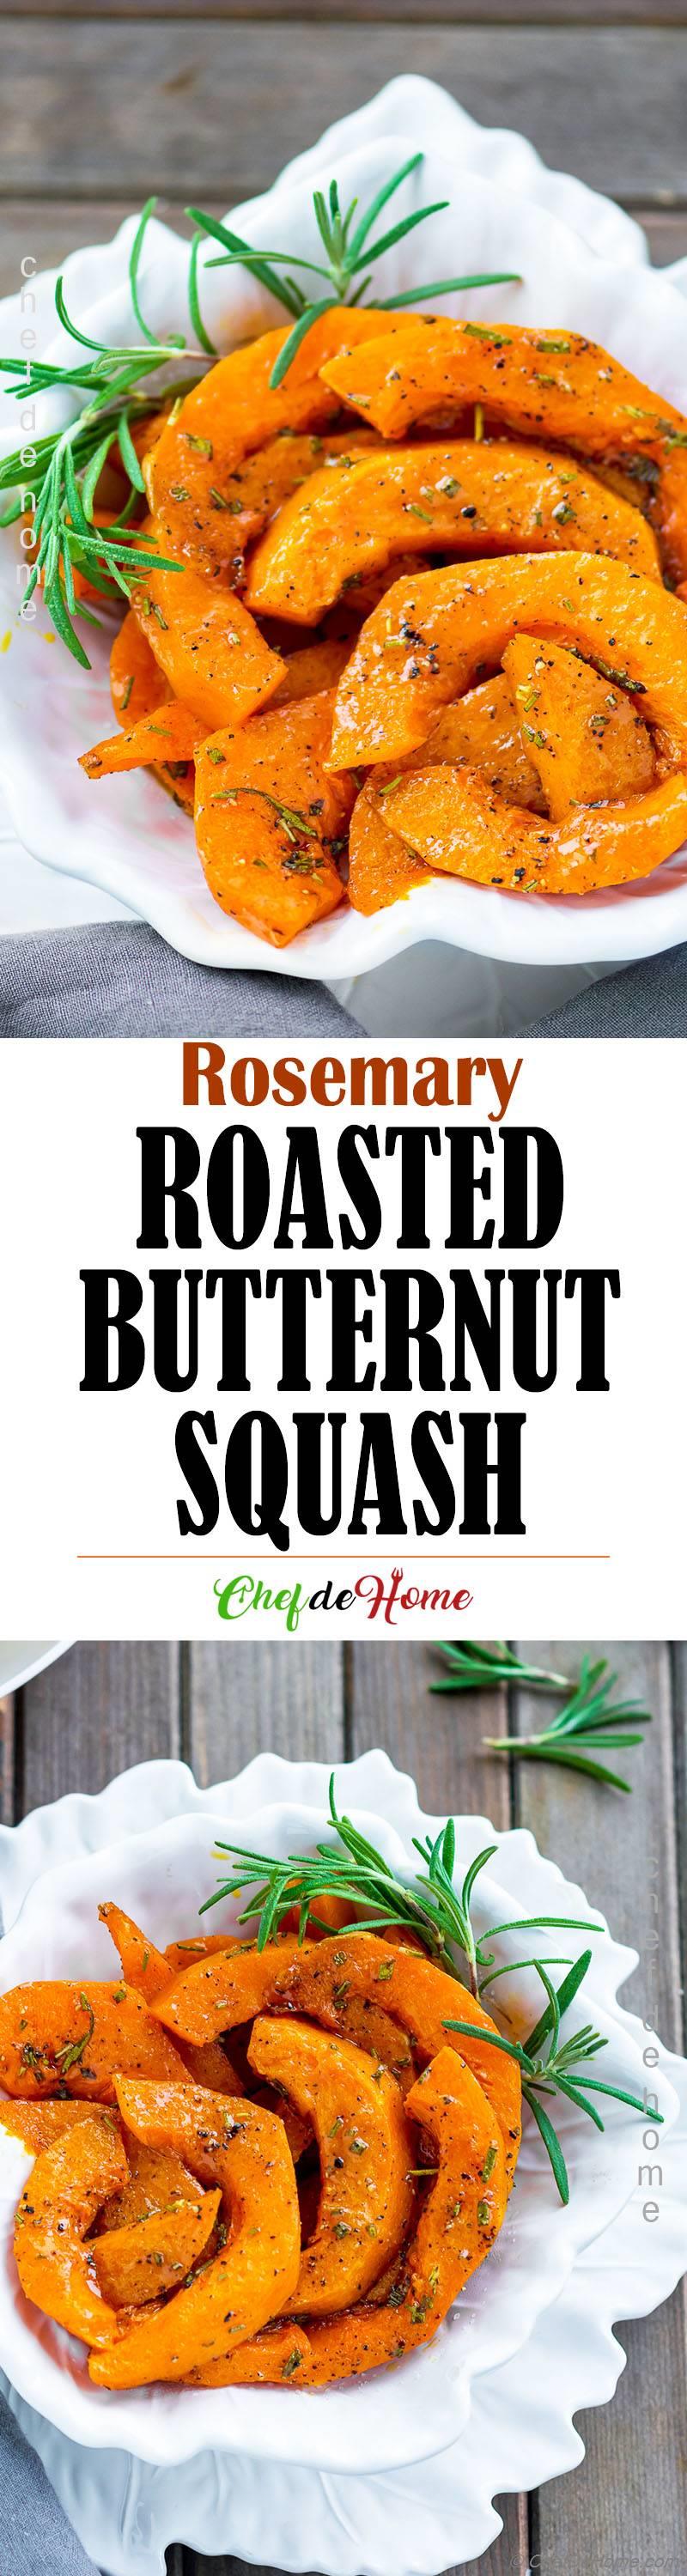 Roasted Butternut Squash with Rosemary Recipe | ChefDeHome.com